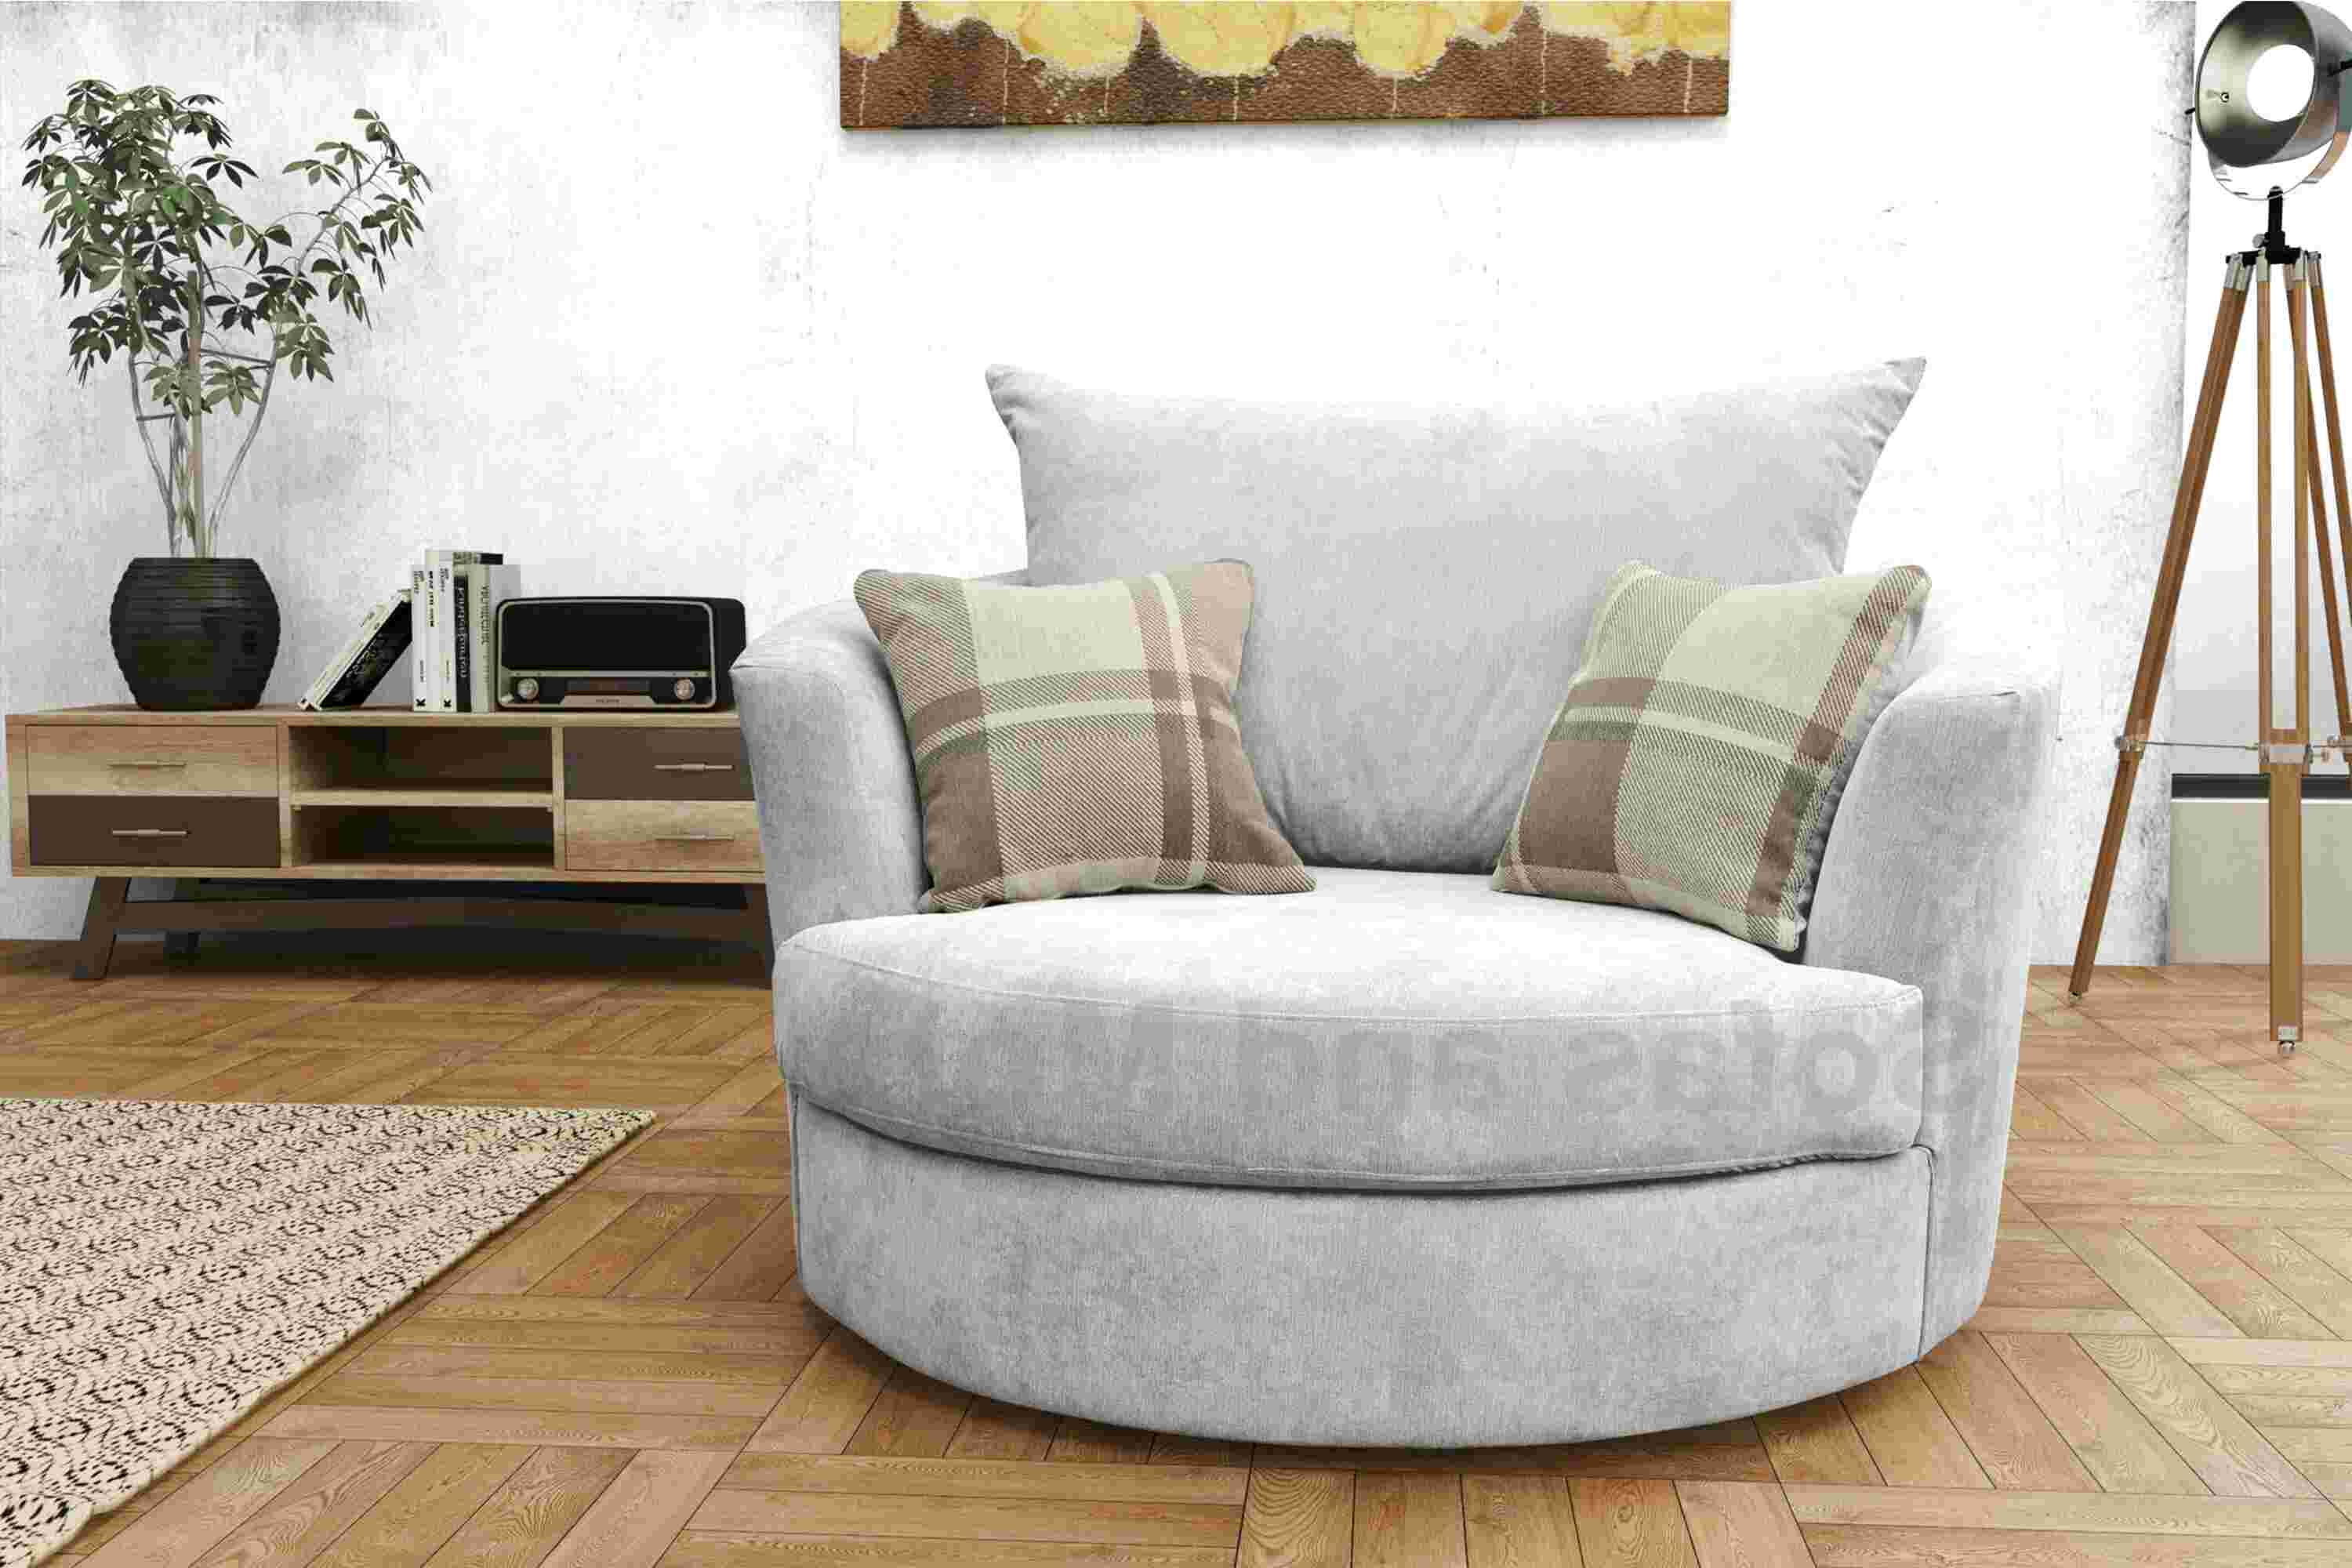 Large Swivel Cuddle Chair for sale in UK View 33 ads